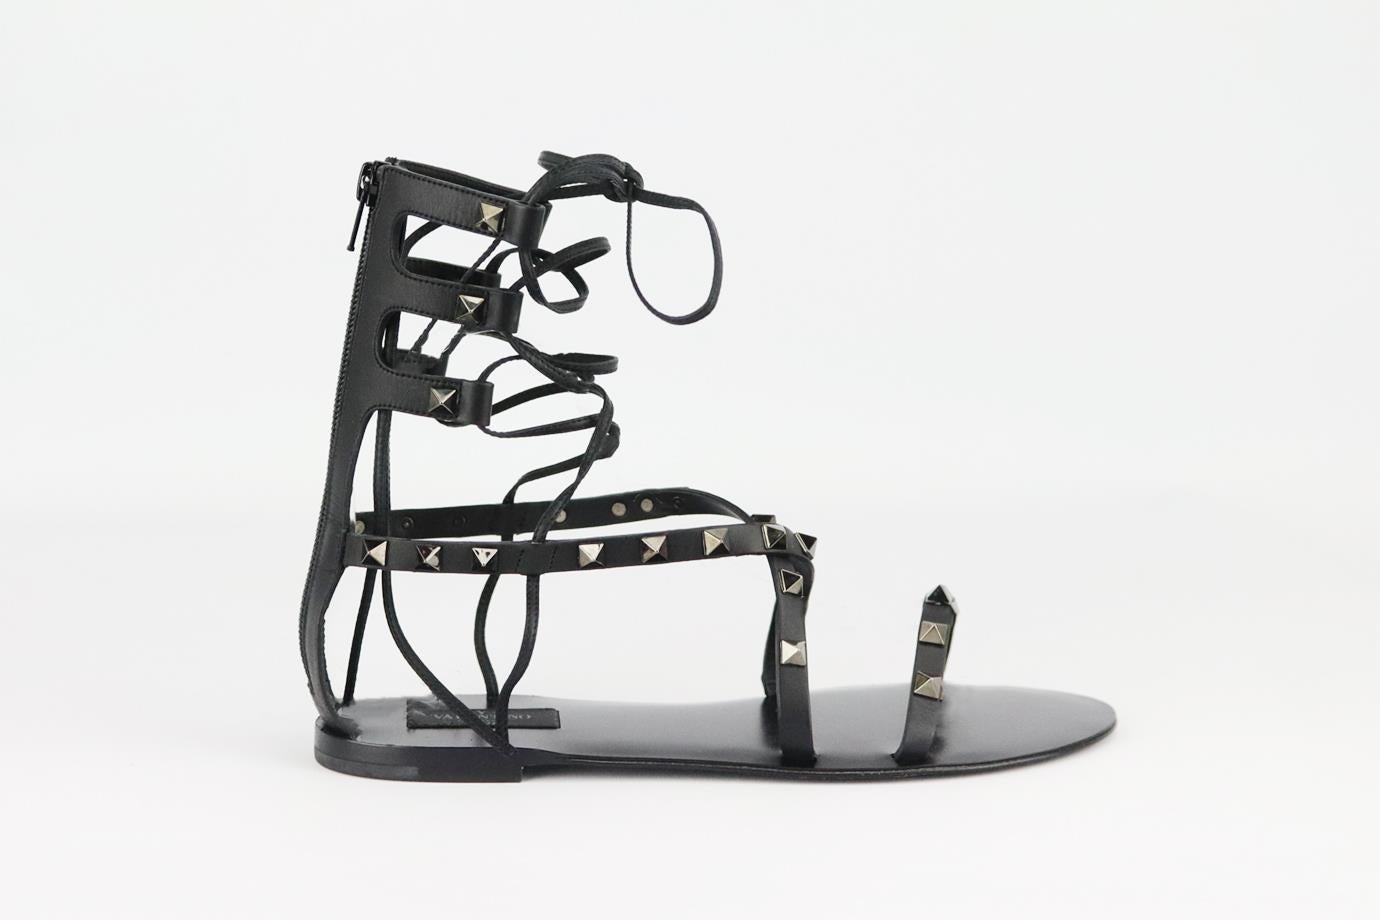 Valentino Garavani Rockstud lace up leather sandals. Black. Zip fastening at back. Does not come with box or dustbag. Size: EU 38 (UK 5, US 8). Insole: 9.5 in. Heel: 0.5 in
